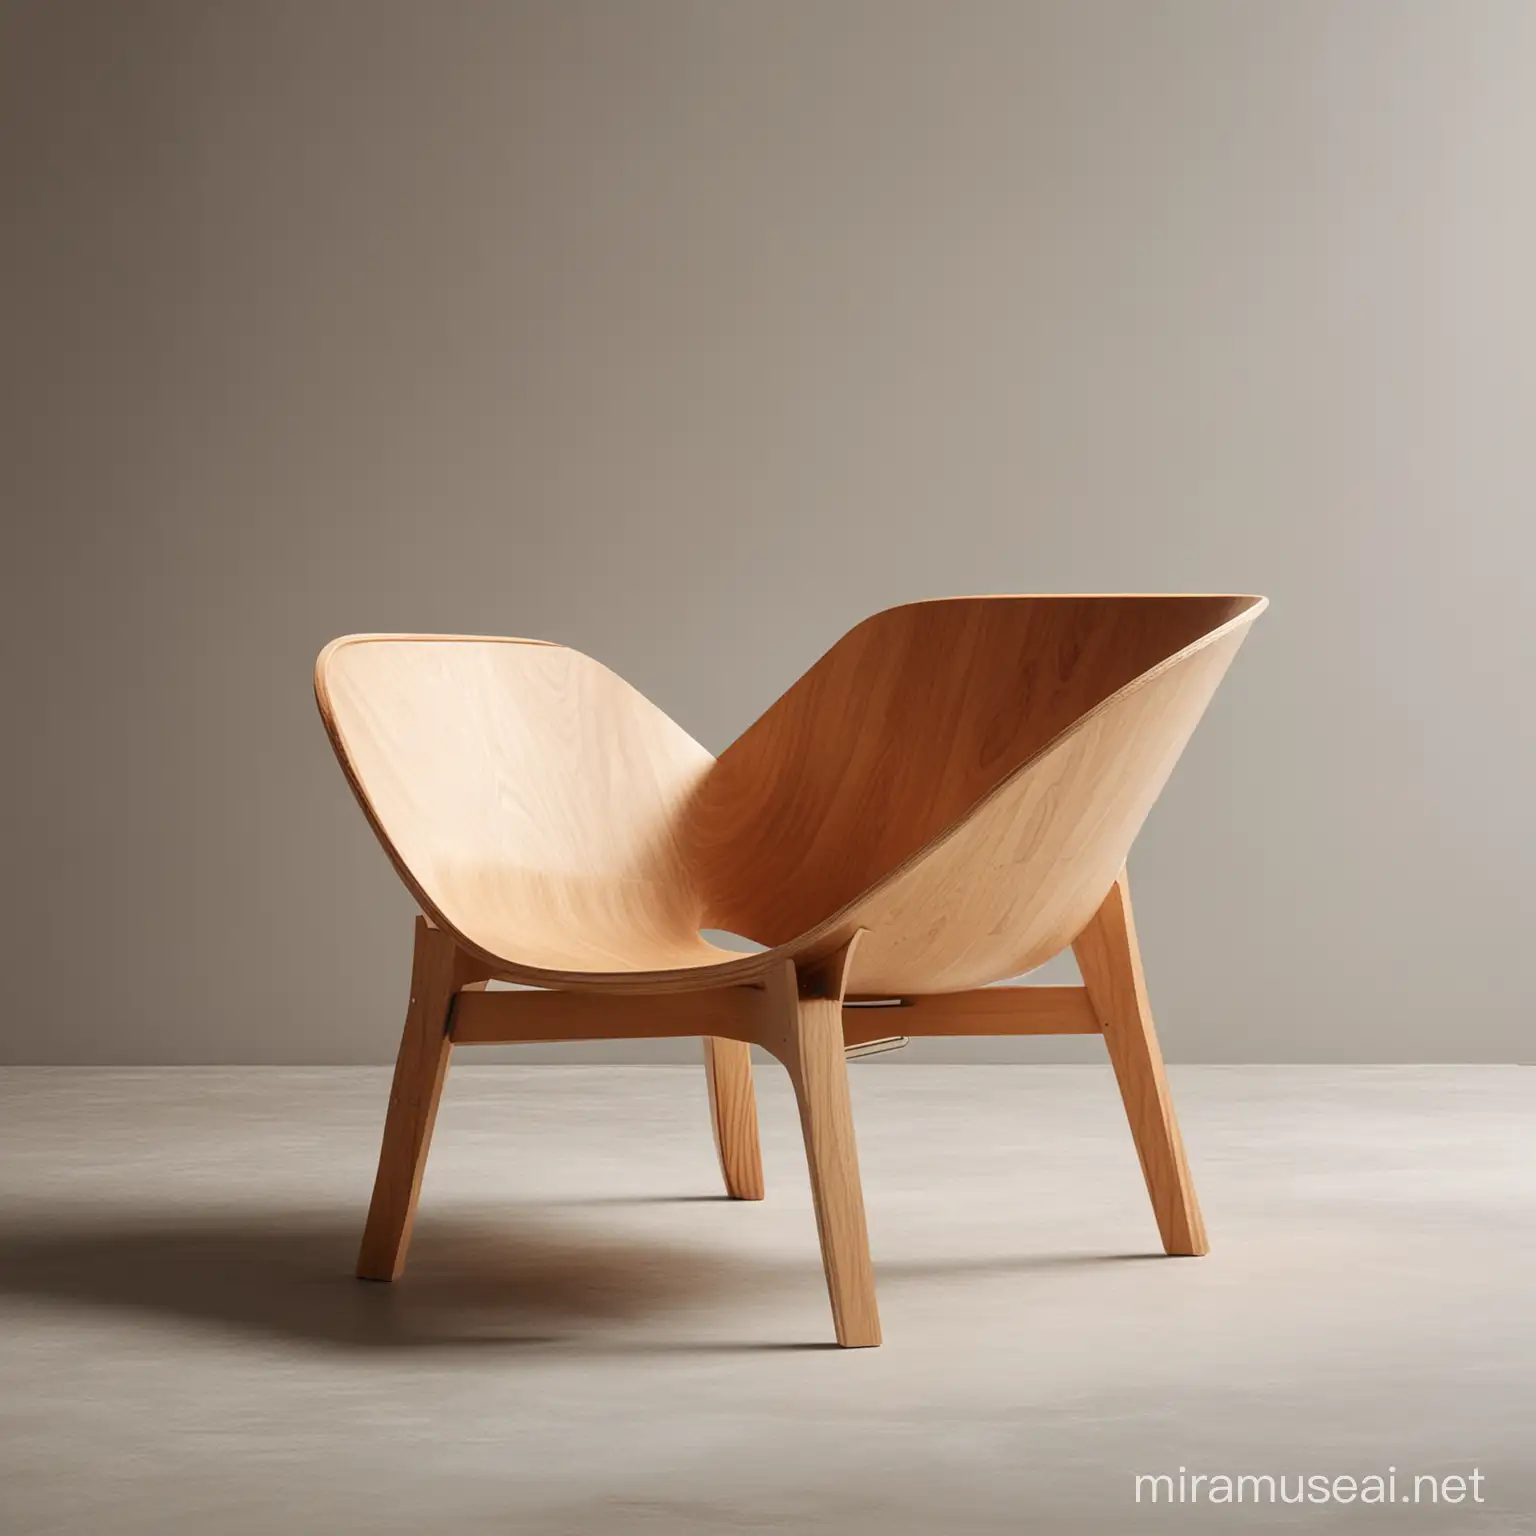 Design of wooden armchair chair, with a modern minimalist style yet bombastic in its appetence , featuring a neutral color palette and clean lines - the back and seat in bended plywood and the main frame and legs in metal 
with ample natural light complemented by recessed LED lighting for a warm and welcoming ambiance